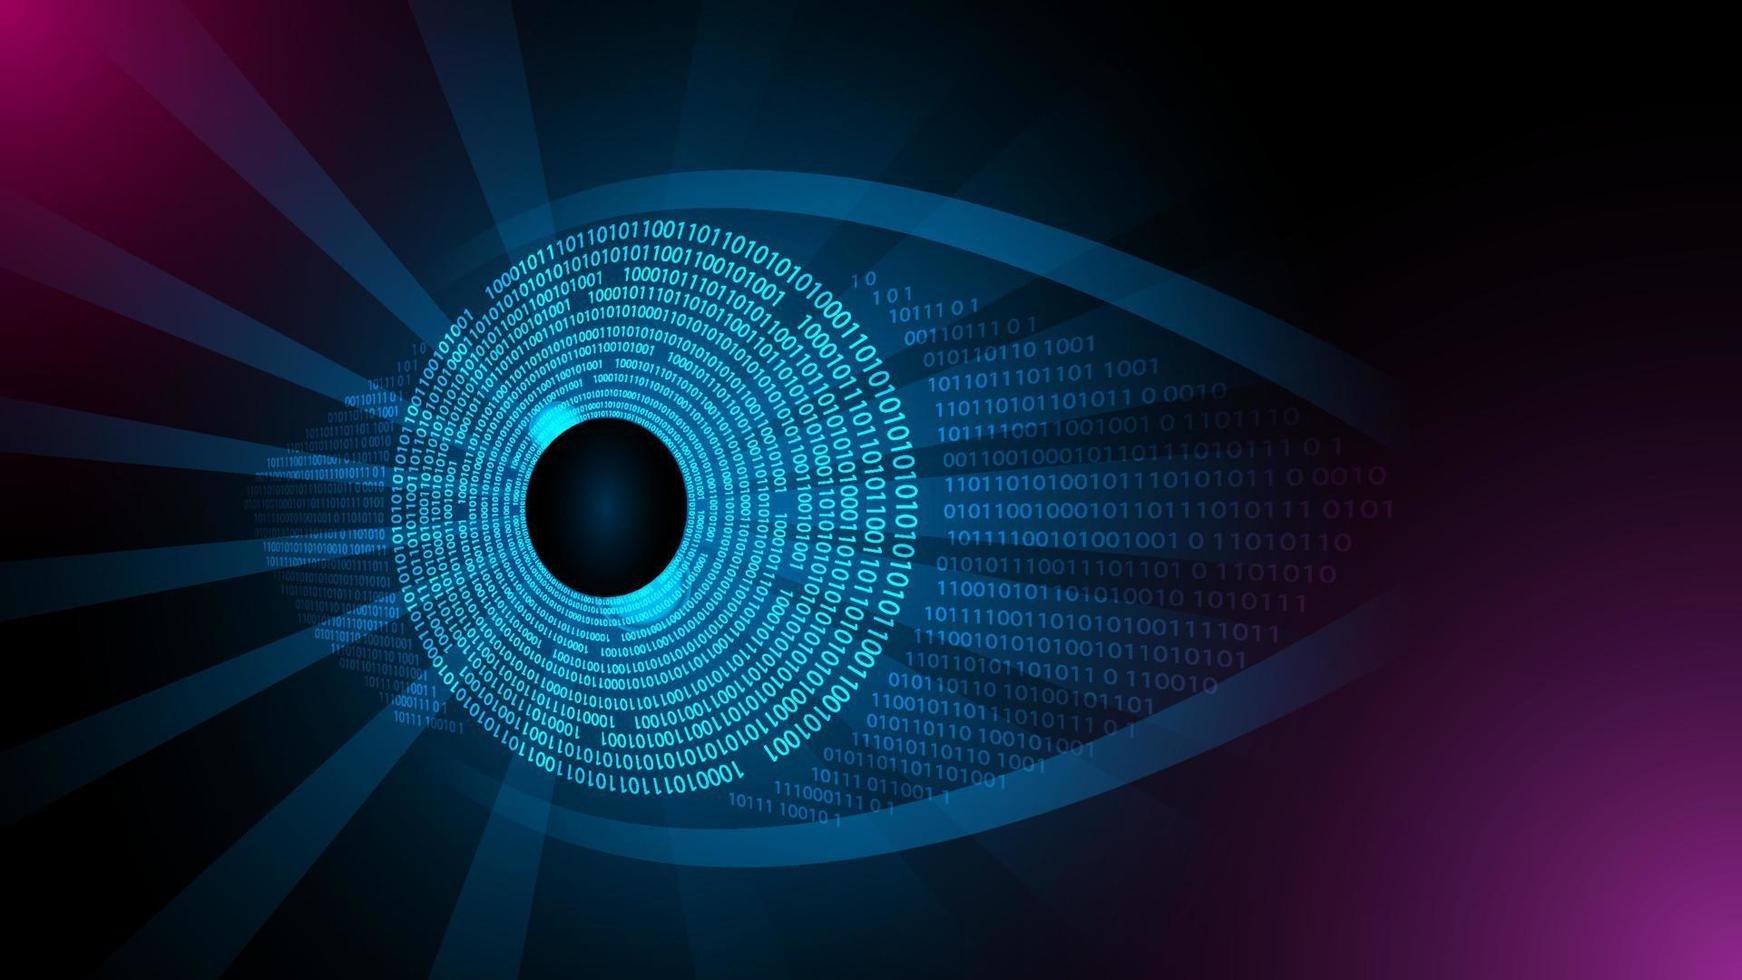 Digital eye data network cyber security technology binary code 0 to 1 glowing blue on dark background. Futuristic tech of virtual cyberspace and internet secure surveillance. Safety scanner. Vector